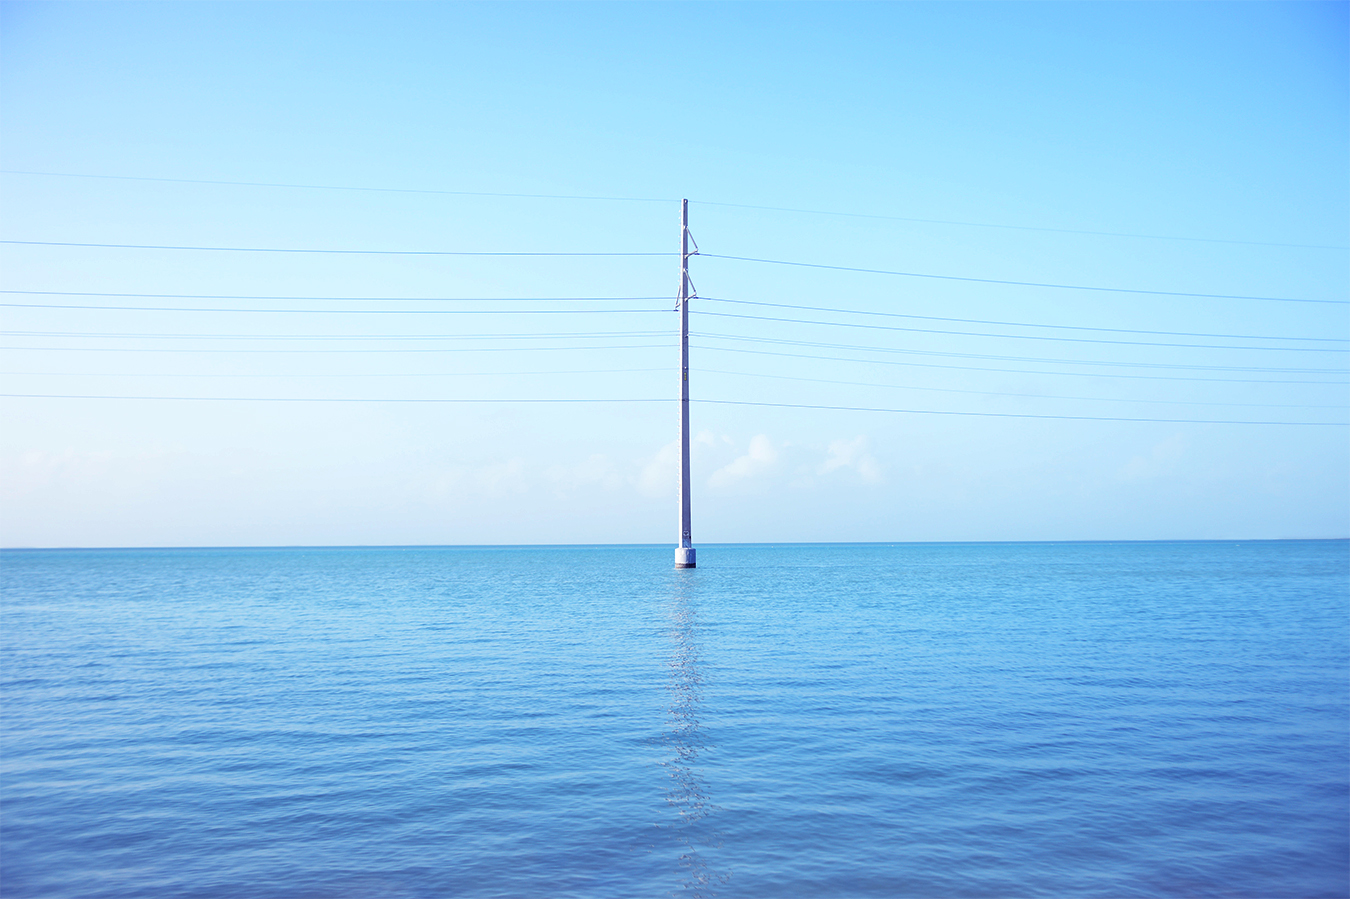 The wire pole in the sea. Photographed in Key West, the southernmost place of United States.